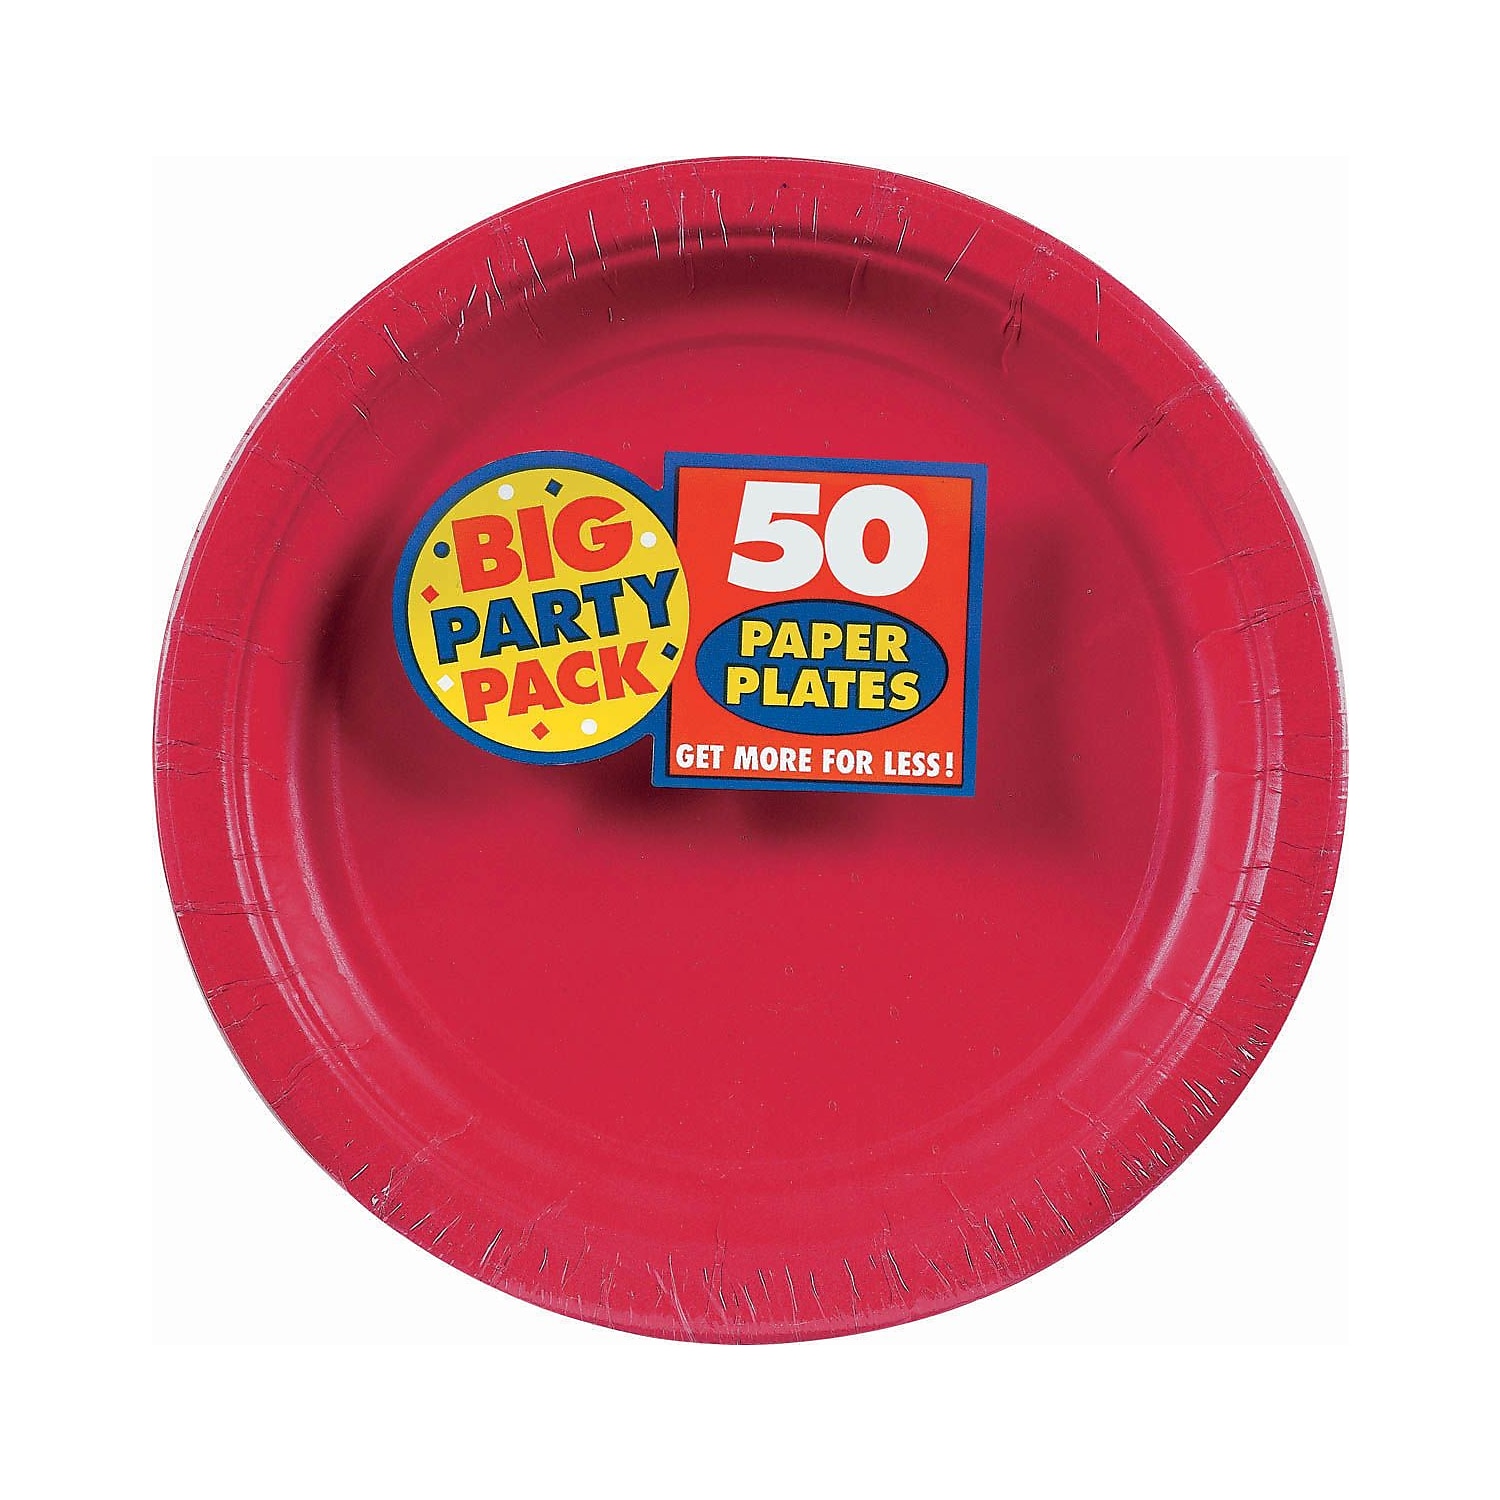 9" Paper Lunch Plates, Apple Red, 50 ct - image 1 of 2